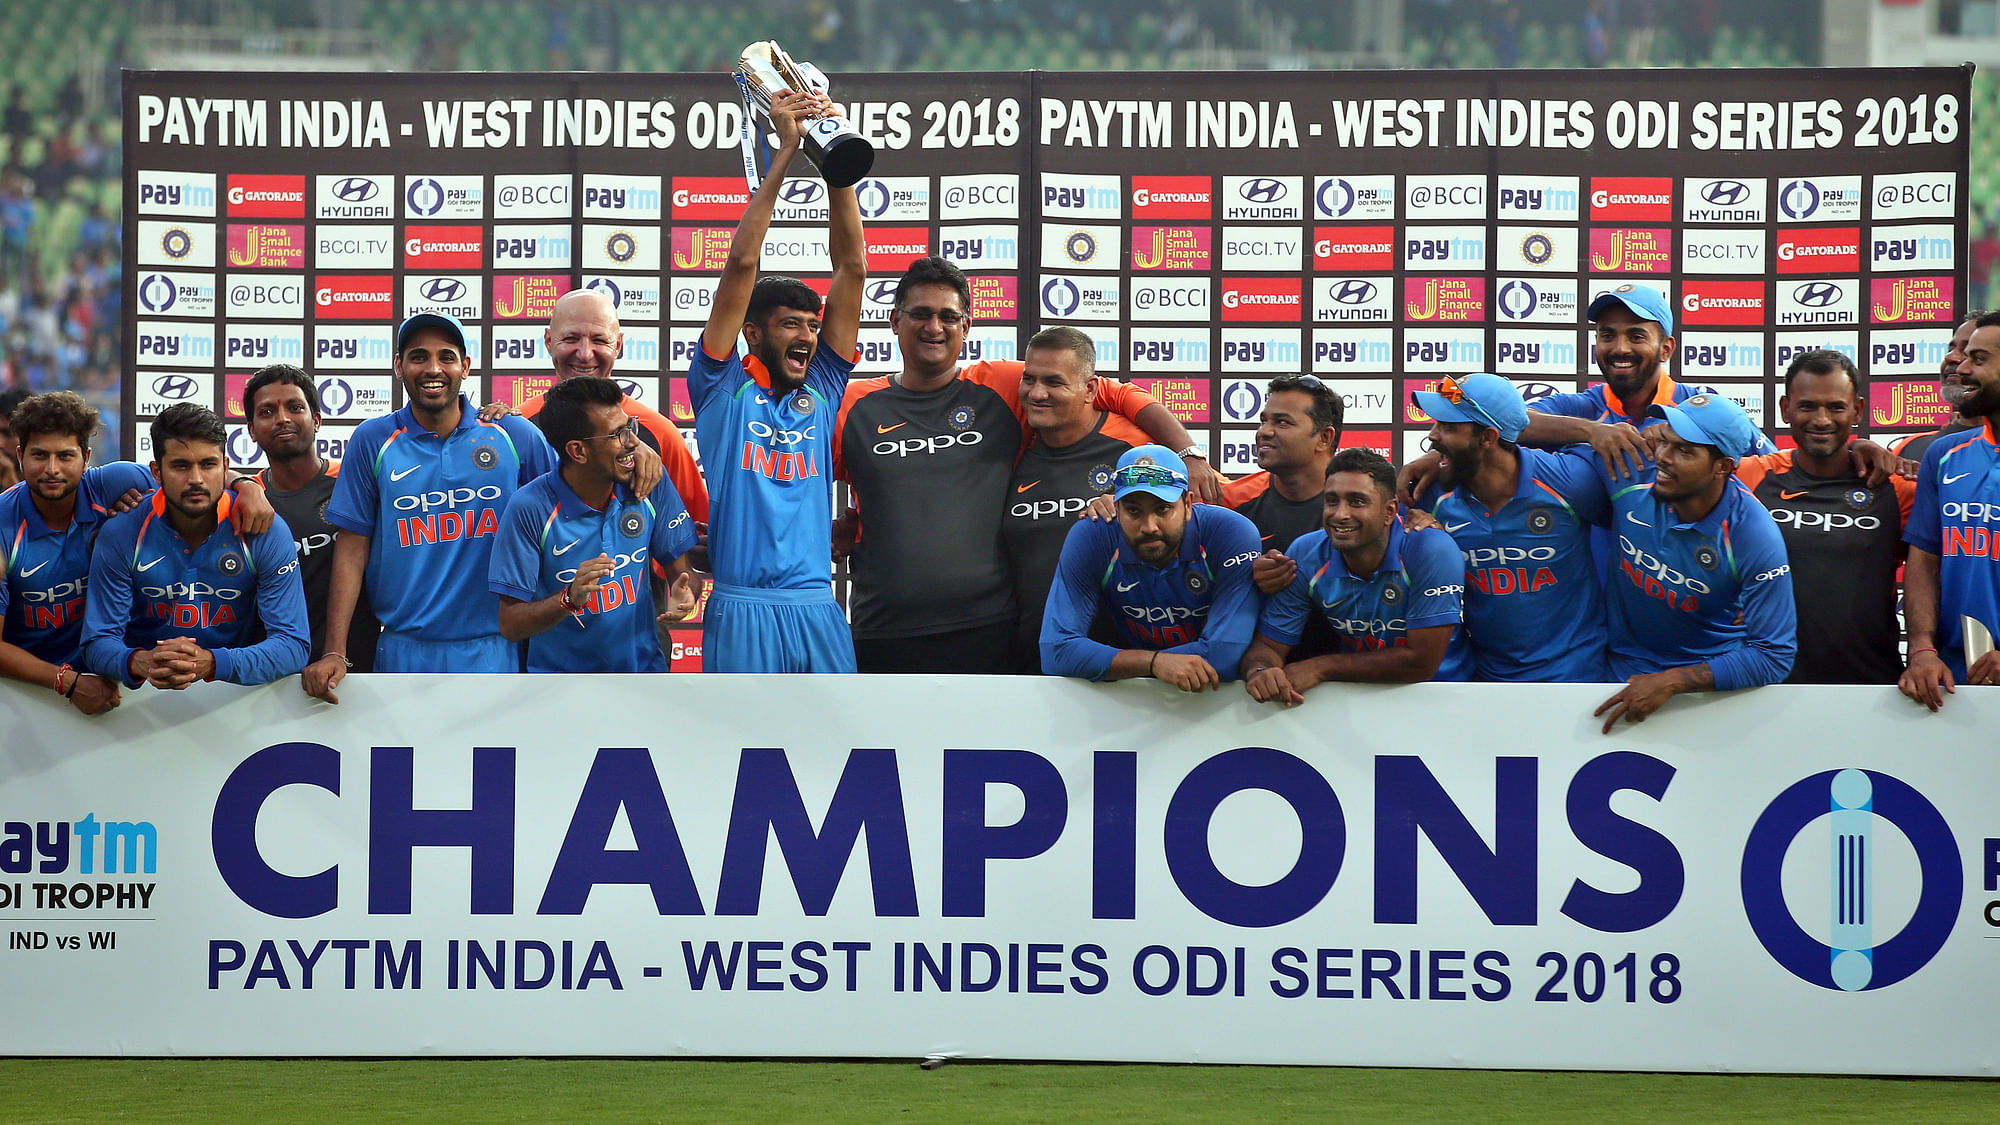 India last a lost a series at home in 2015, when they went down 2-3 against South Africa.